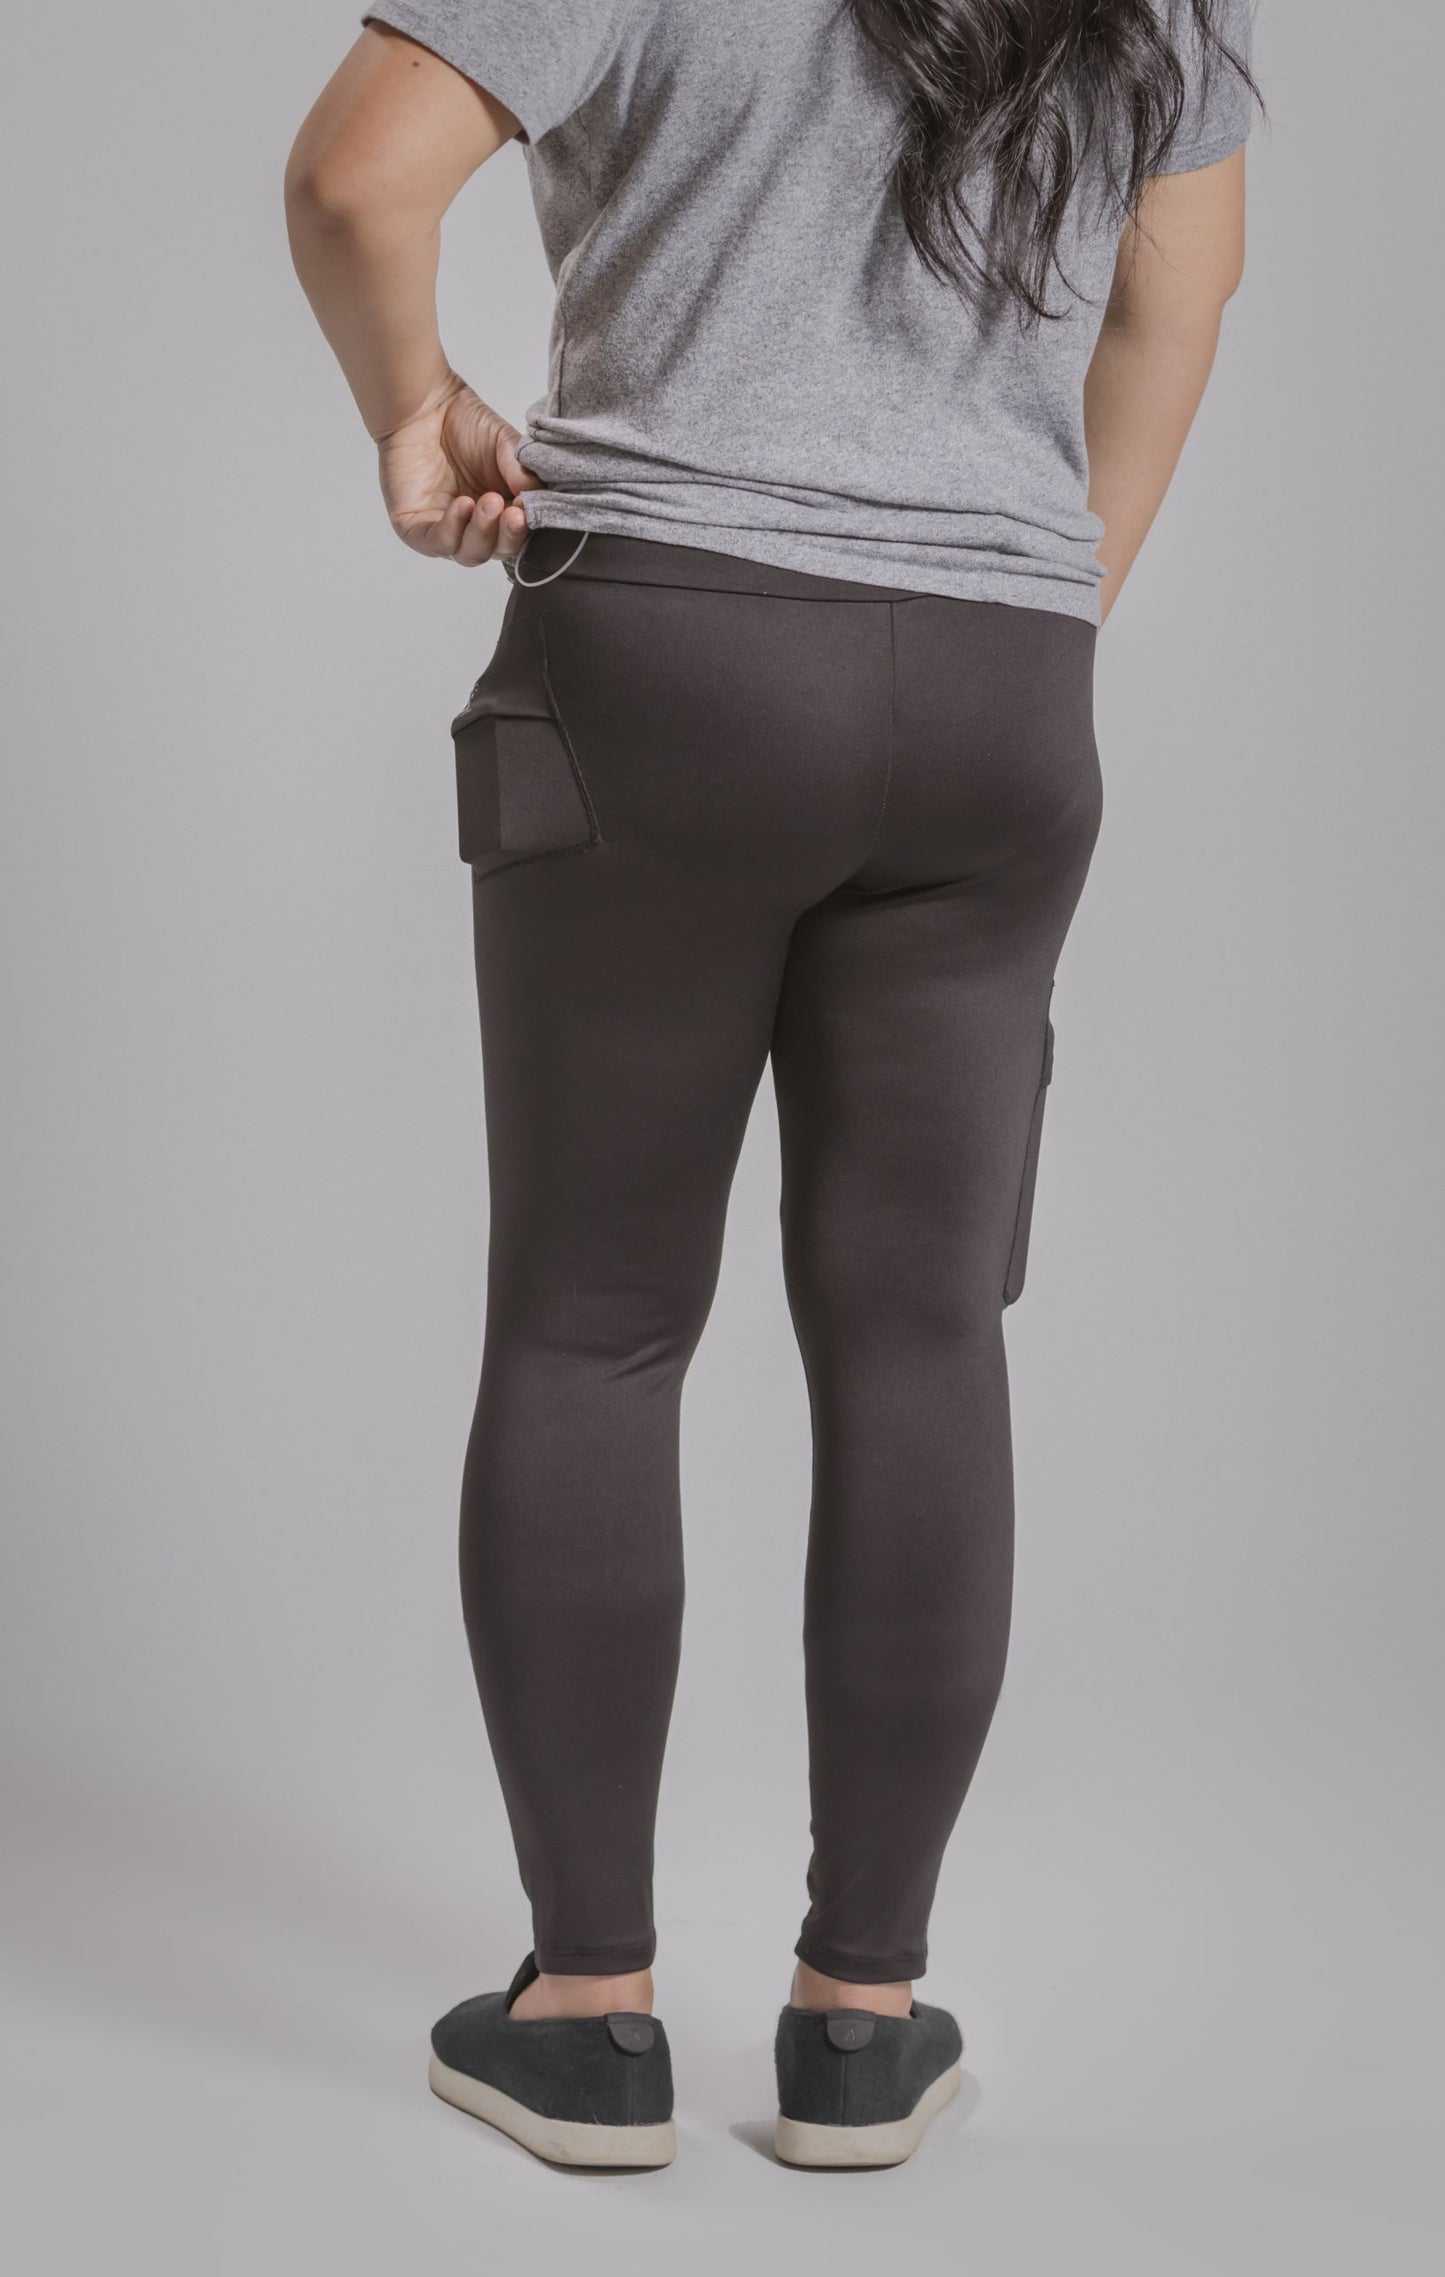 Women's Activewear Leggings with Insulin Pump and Cell Phone Pockets